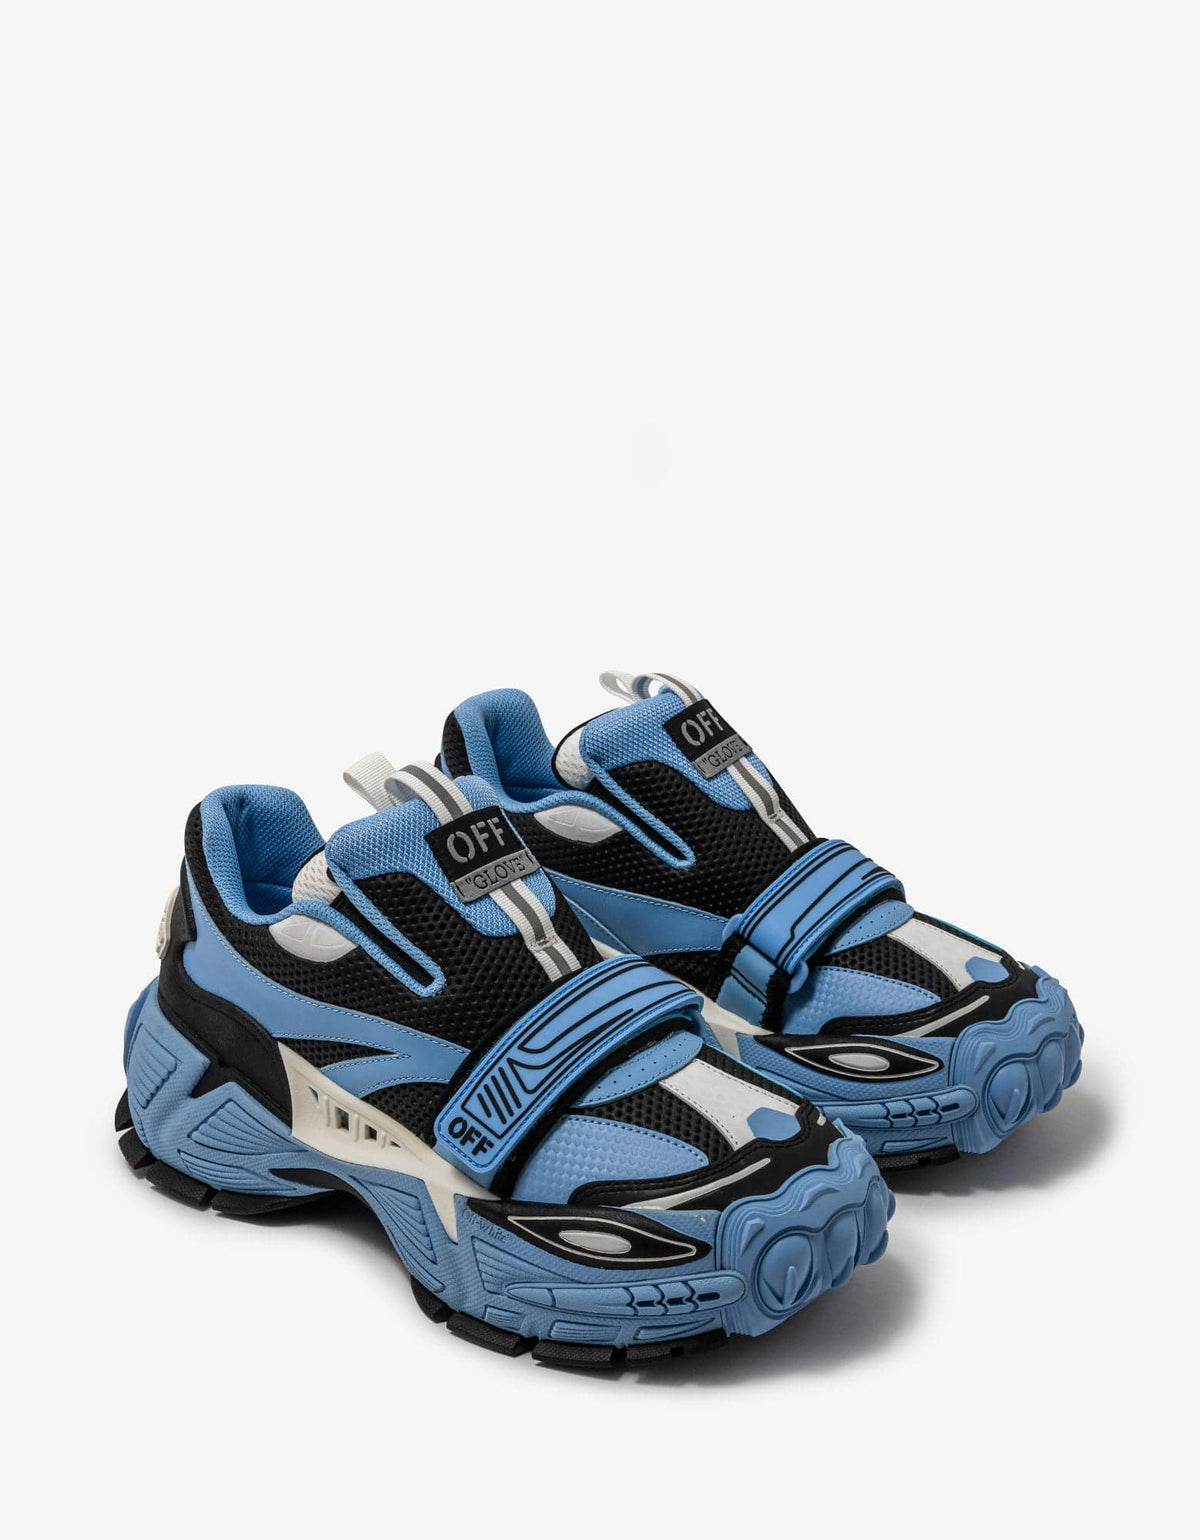 Off-White Off-White Glove Slip-On Blue Trainers